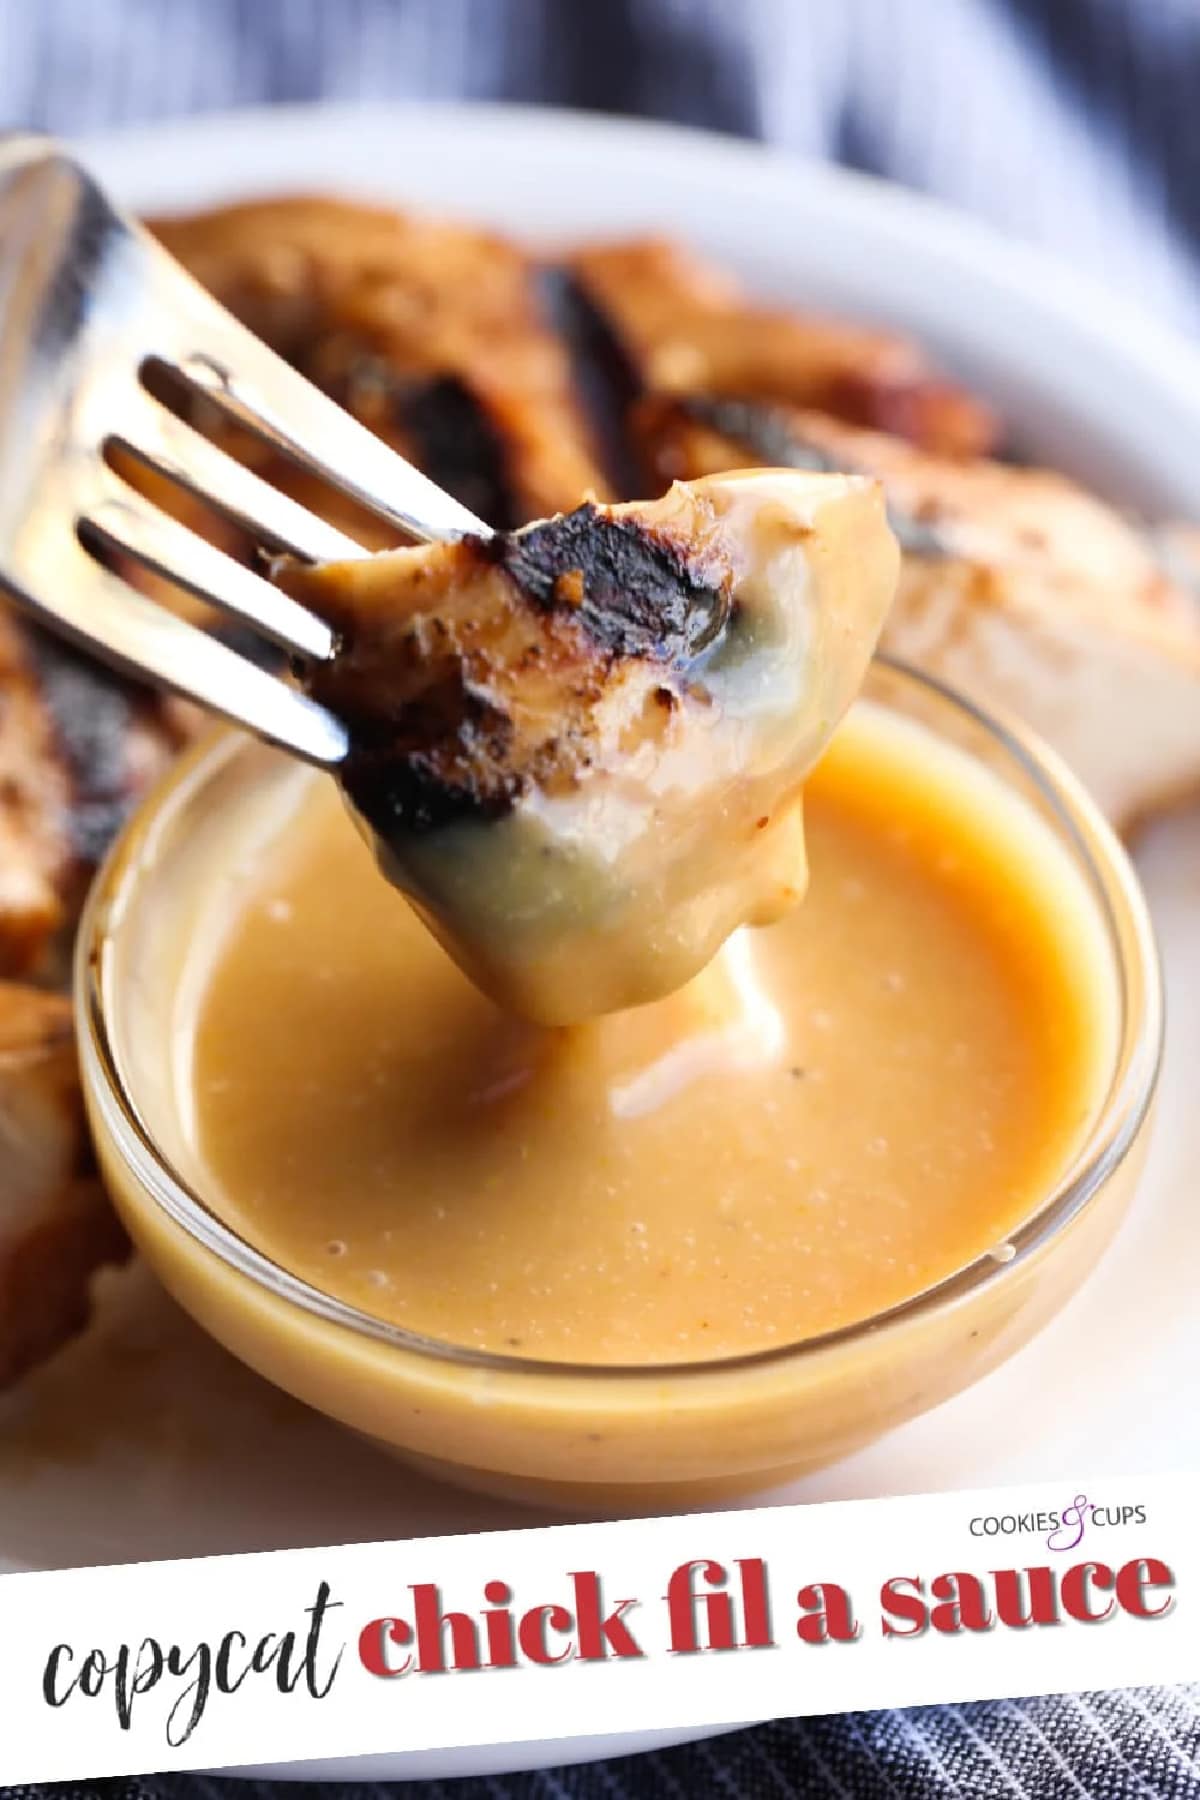 Chicken Dipping Sauce (Copycat Chick-Fil-A Sauce Recipe) Pinterest Image with text